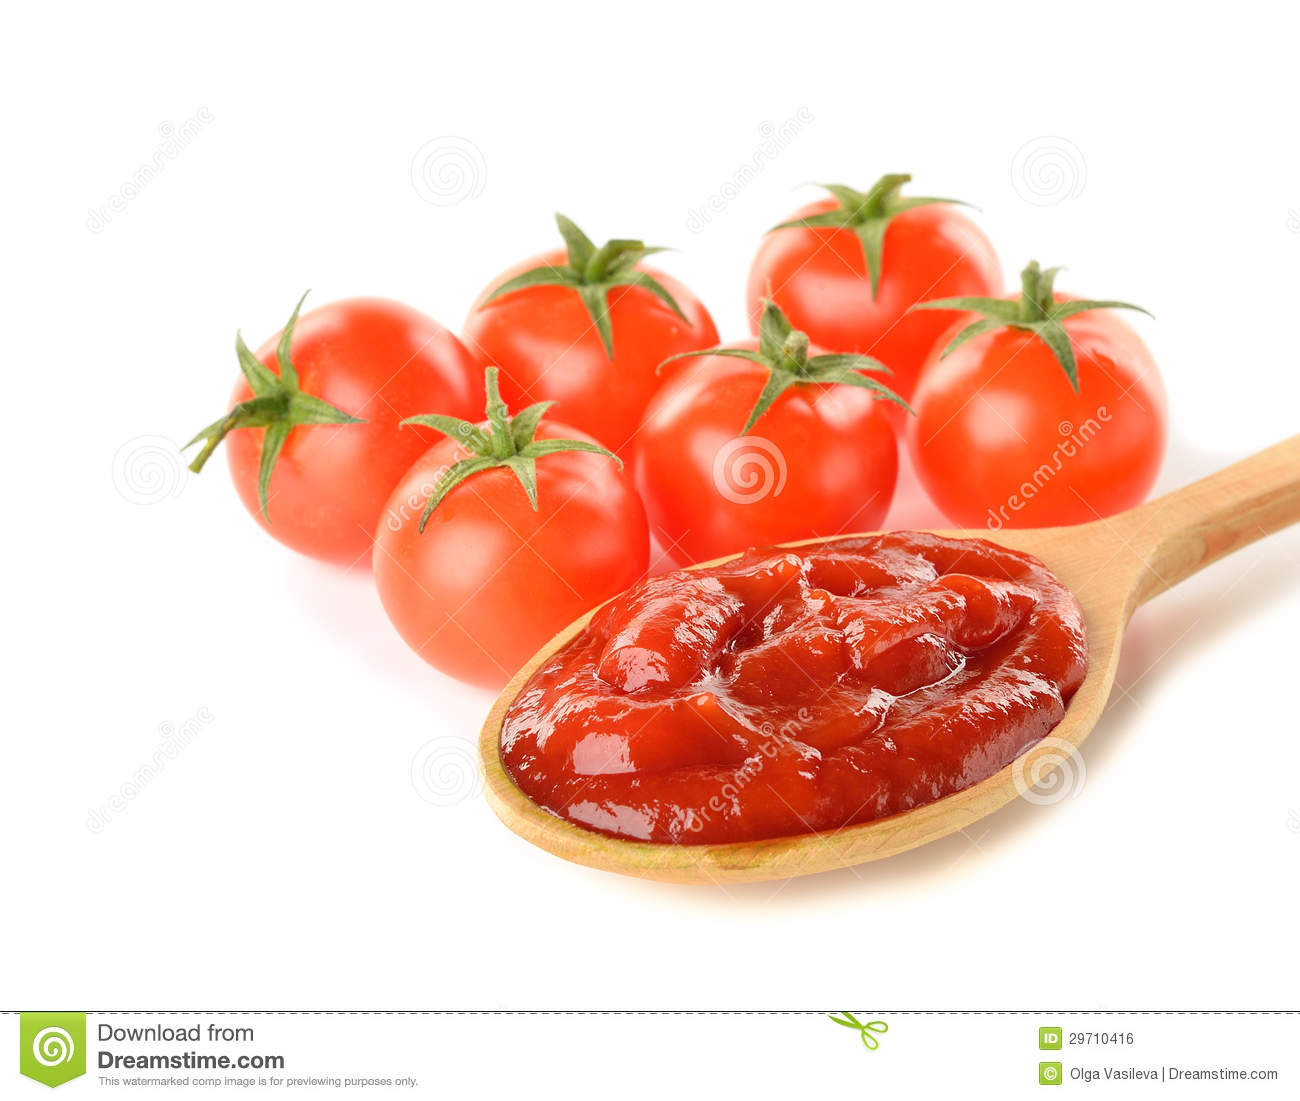 Tomato Sauce And Ripe Tomatoes On White Background 